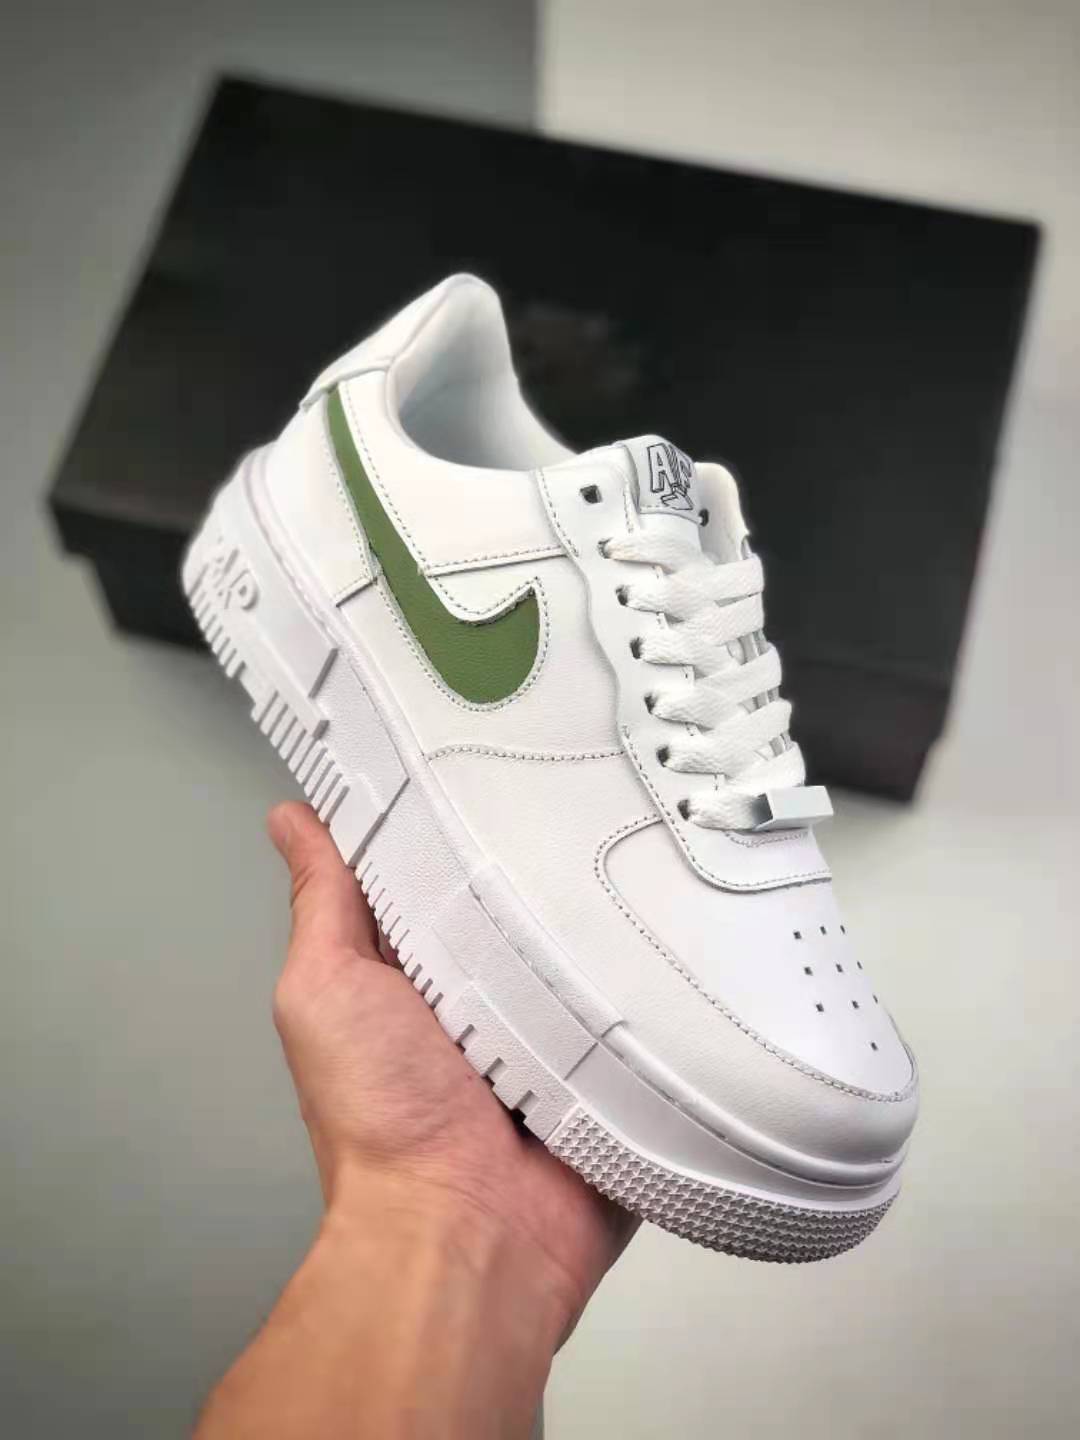 Nike Air Force 1 Pixel White Green CK6649-005 - Stylish and Fresh Women's Sneakers!